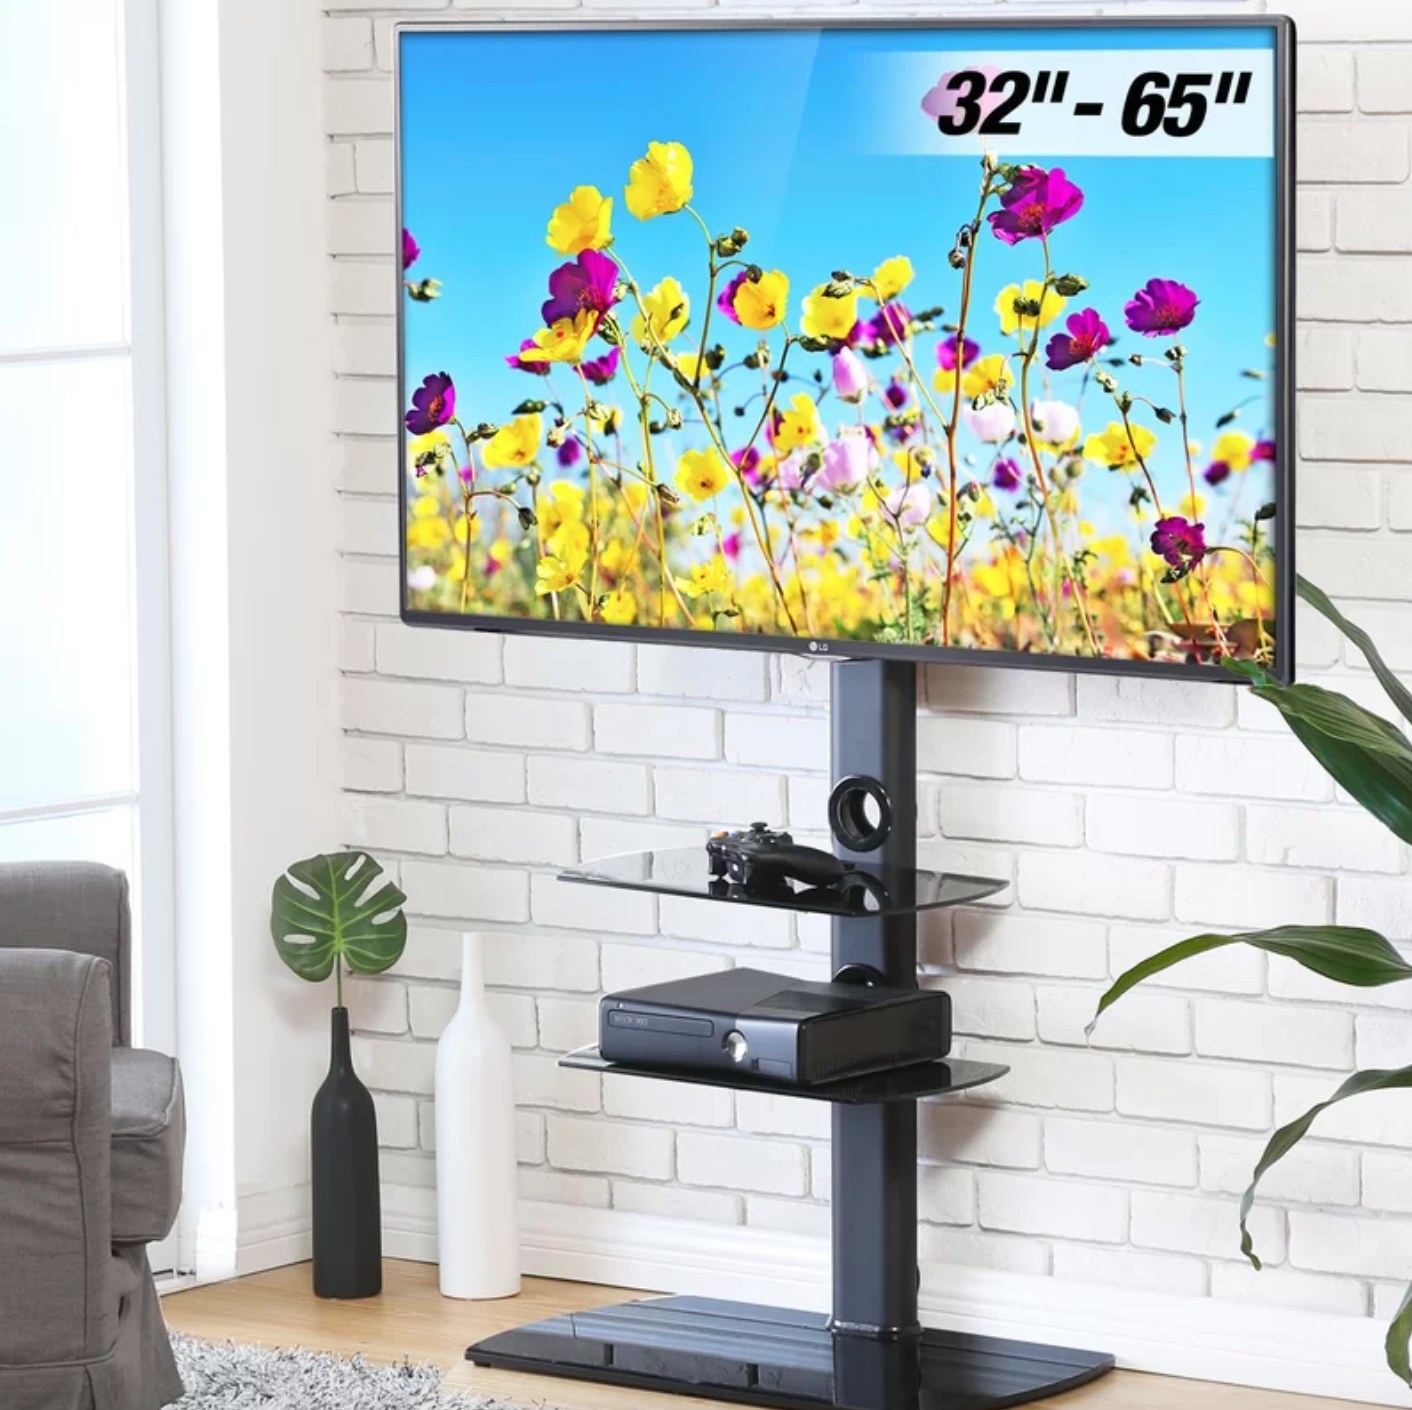 The floor stand mount being used to hold a flat screen tv